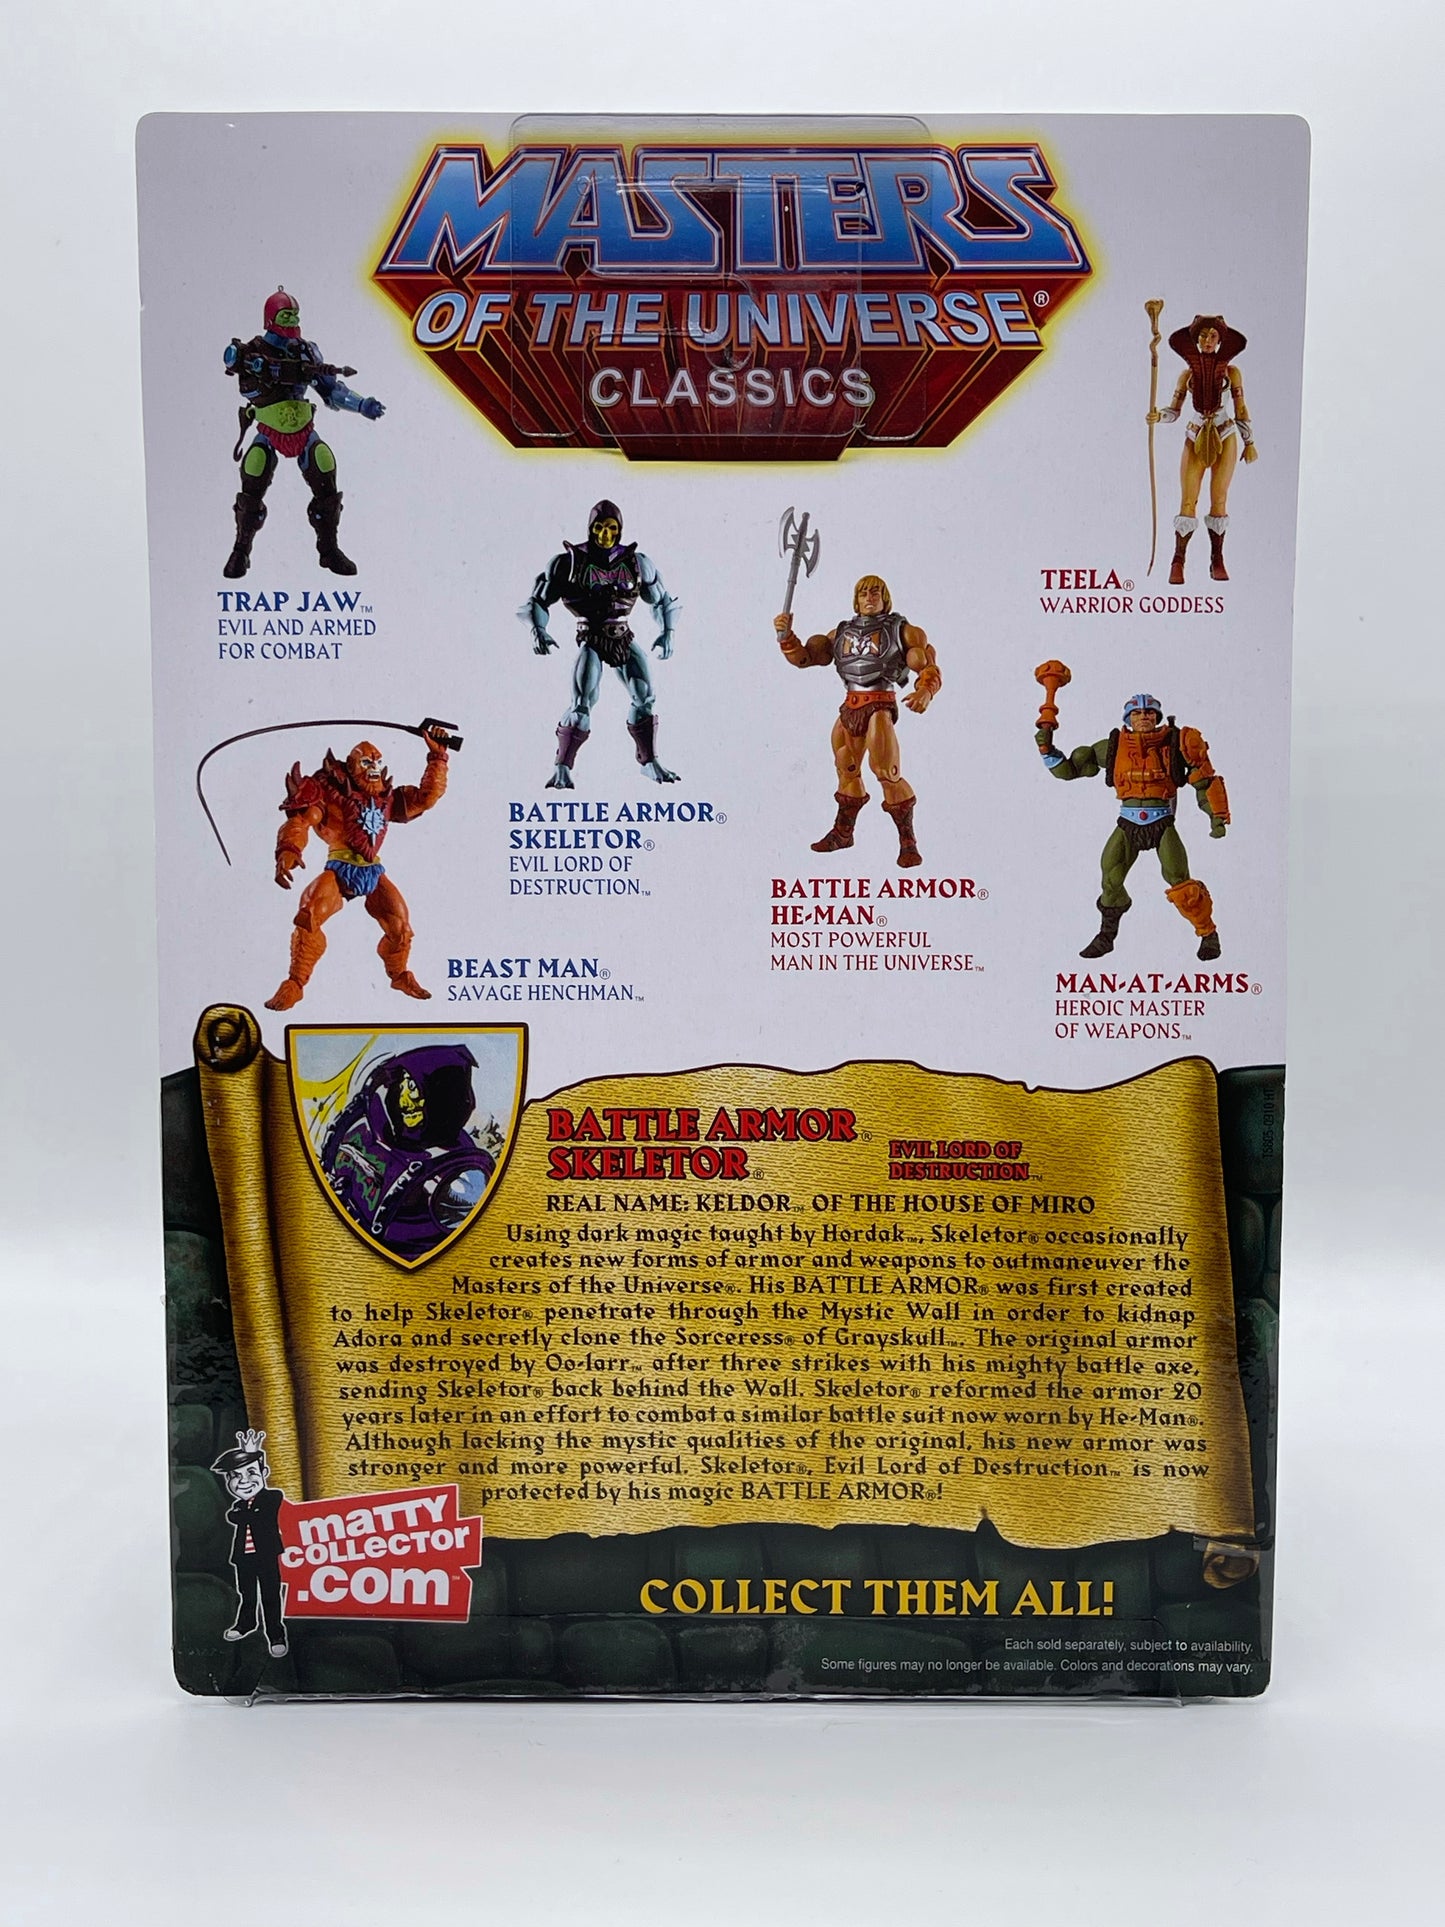 Masters of the Universe Classics Battle Armor Skeletor